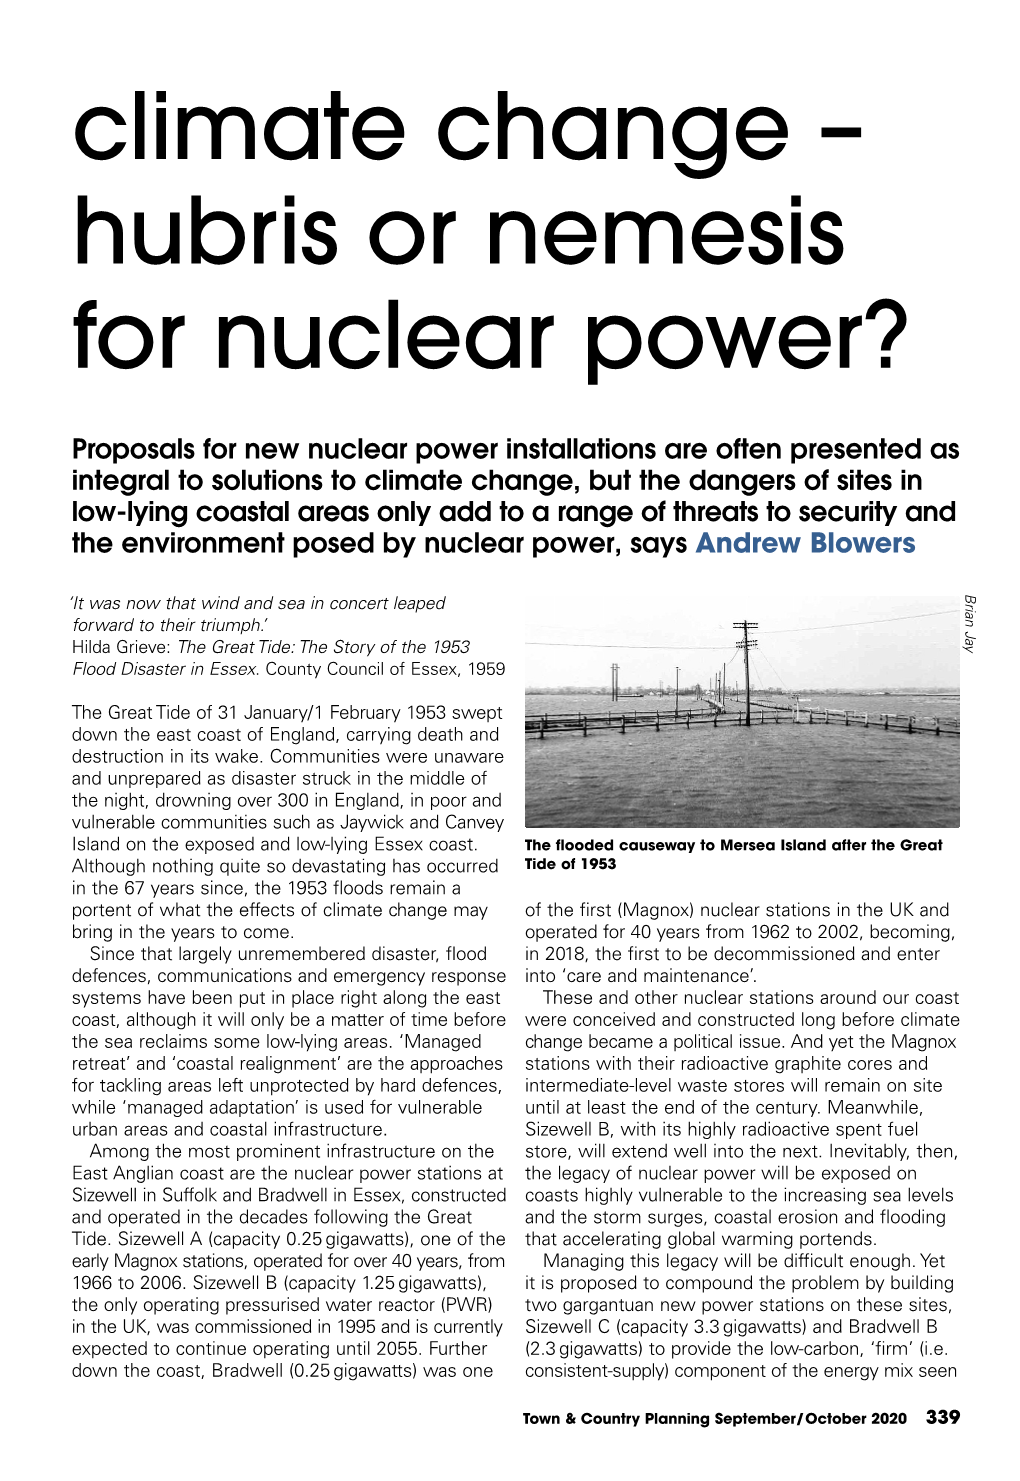 Climate Change – Hubris Or Nemesis for Nuclear Power?